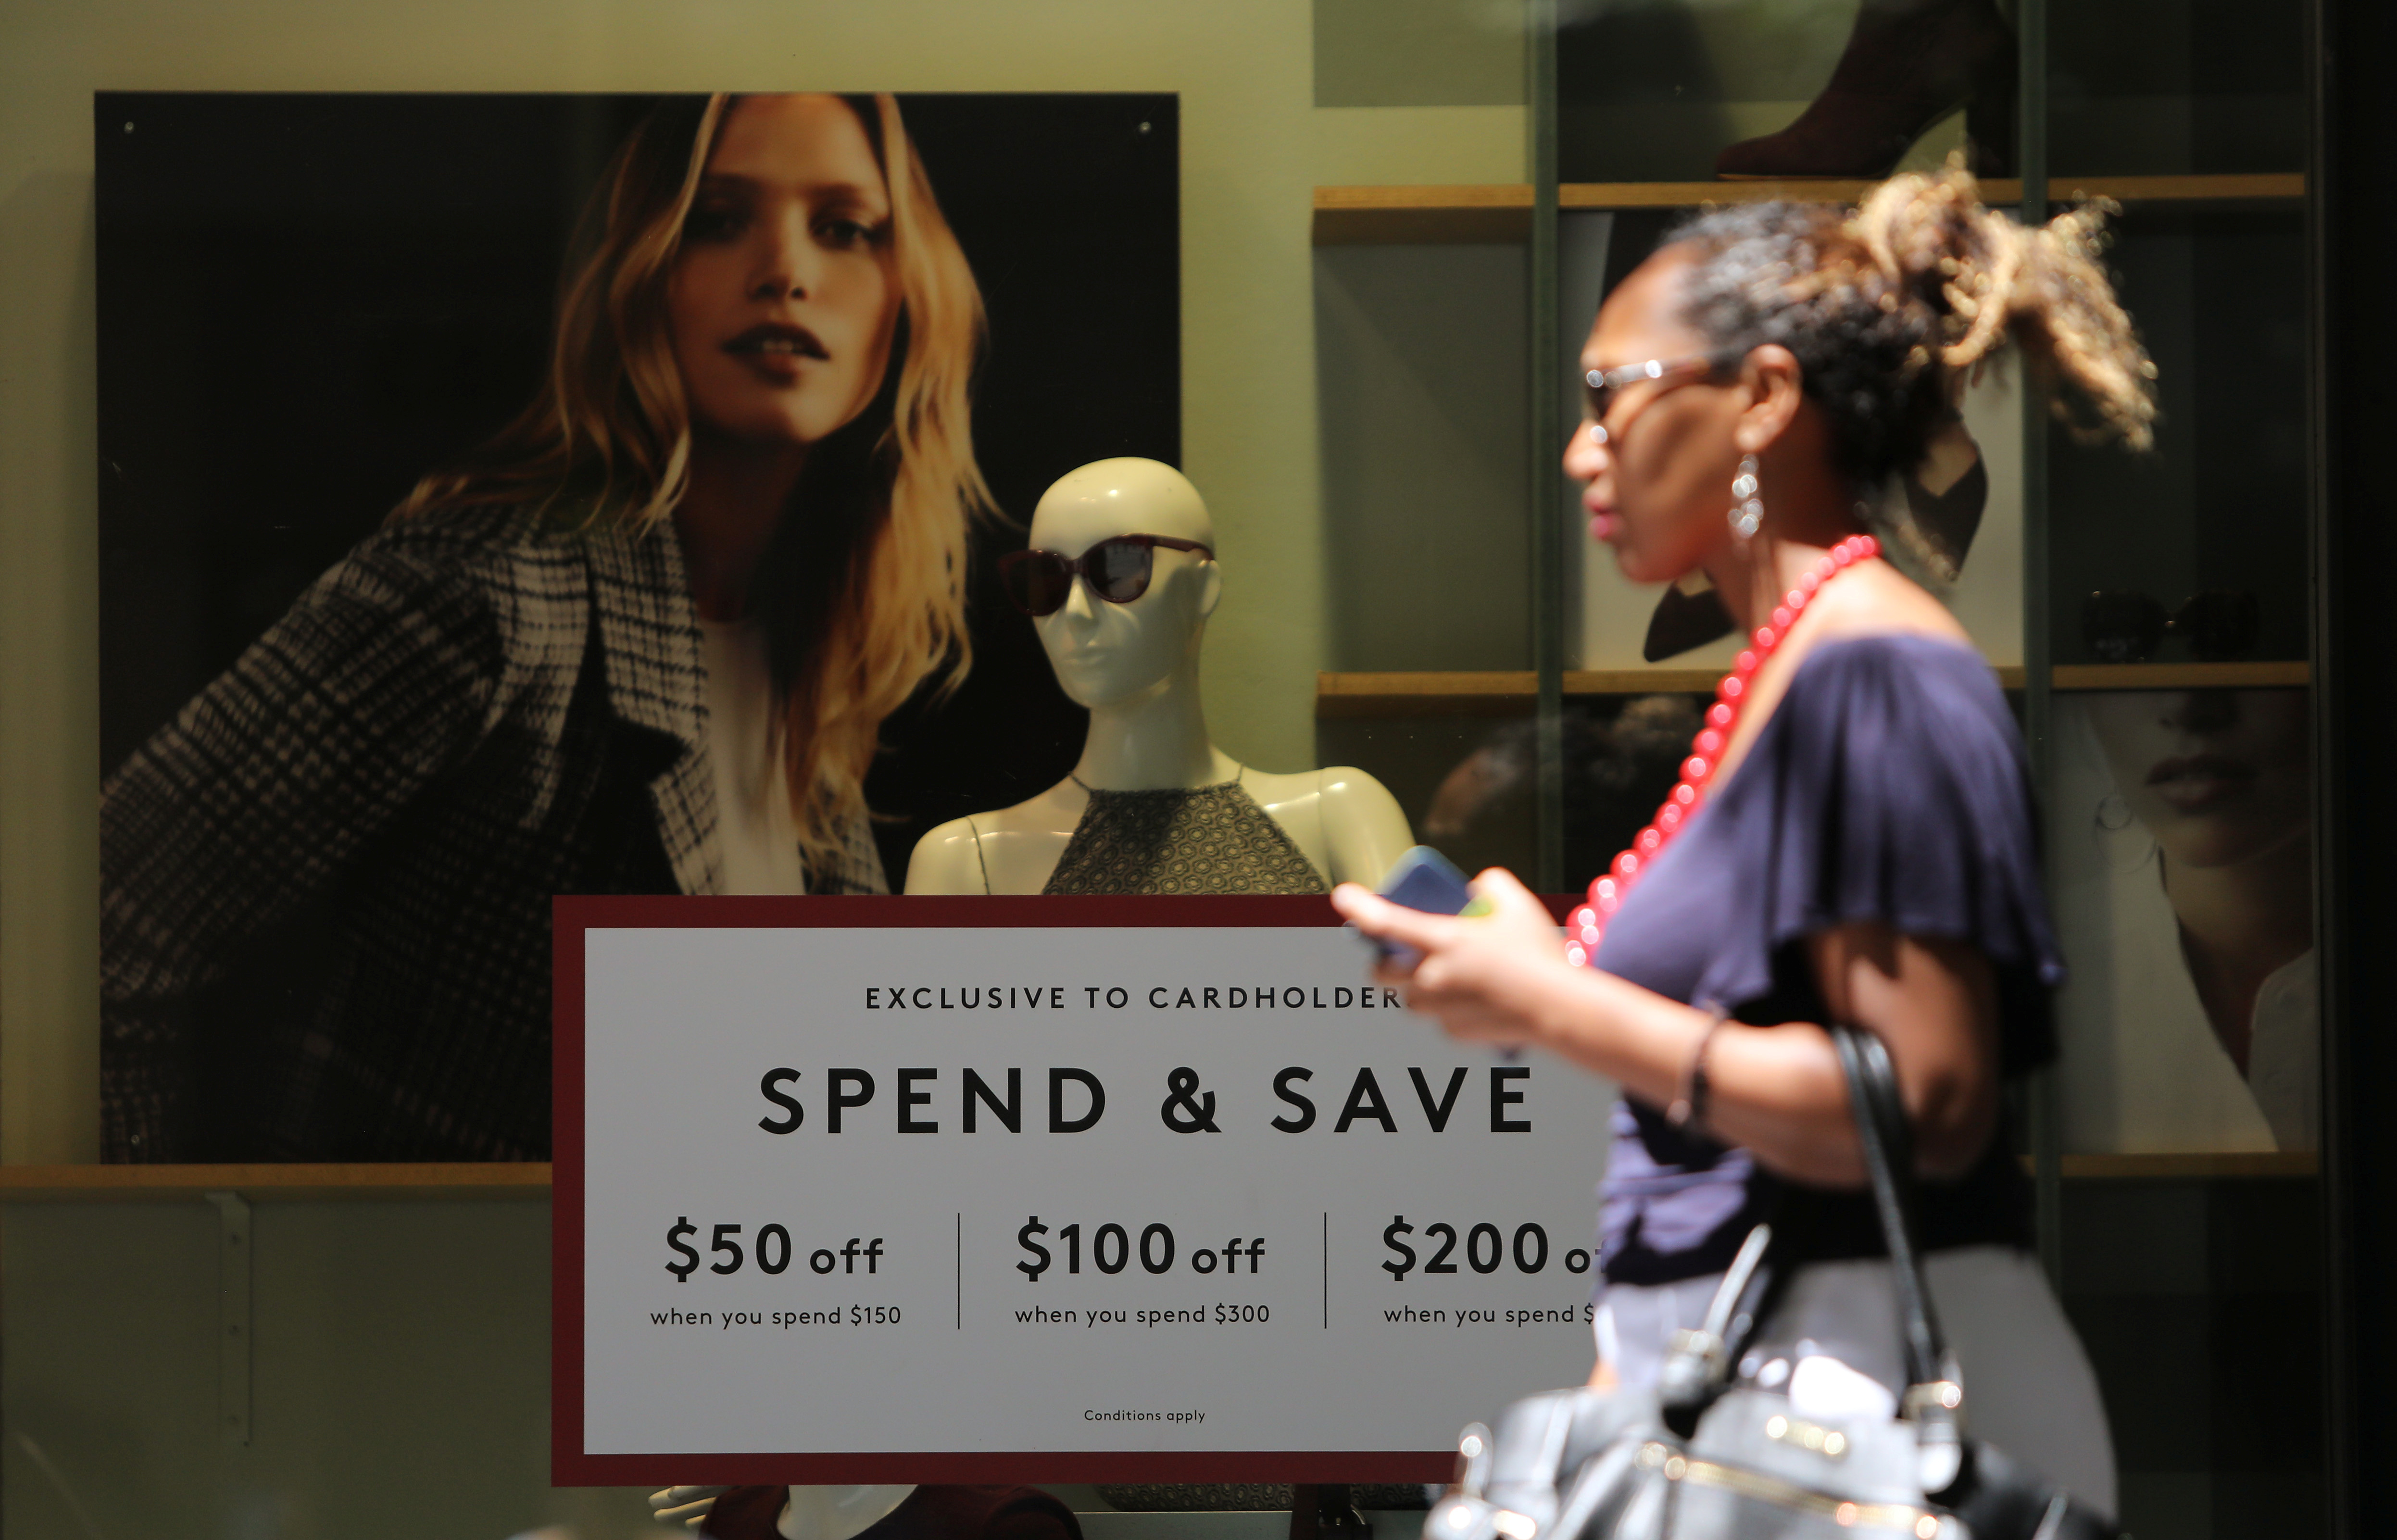 A woman walks past a display promoting discounts in Sydney